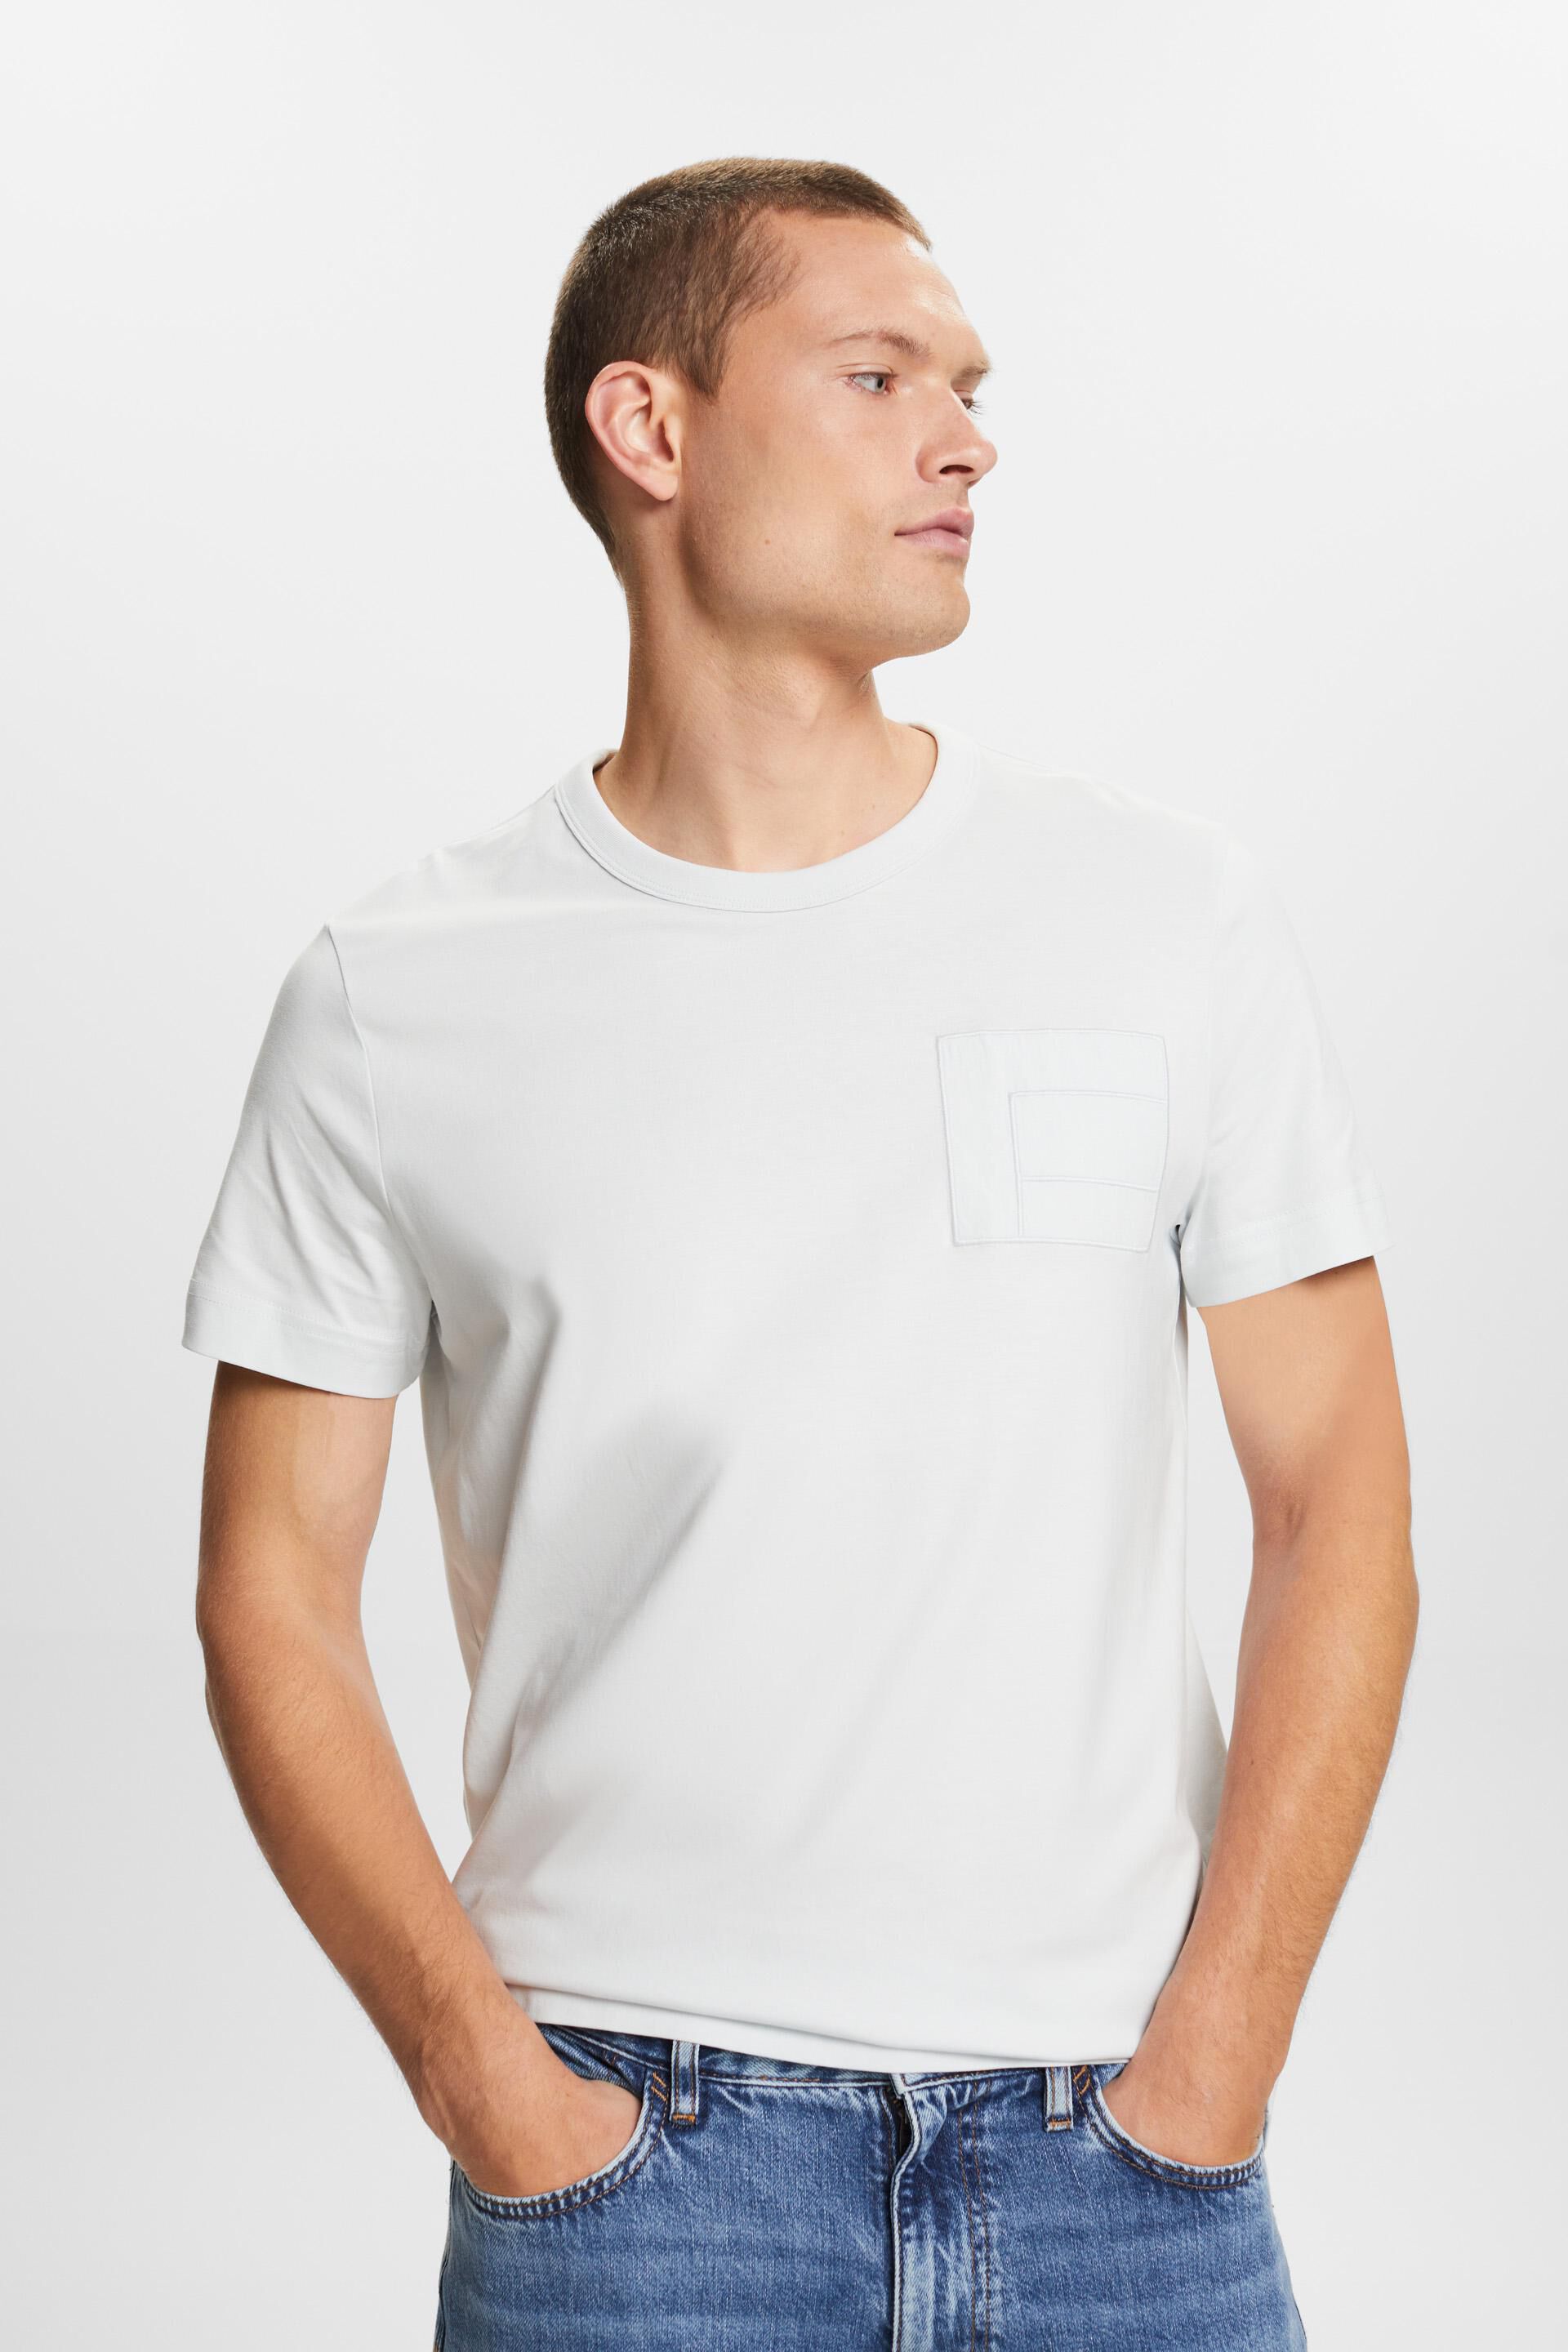 Esprit Jersey cotton 100% t-shirt embroidery, with